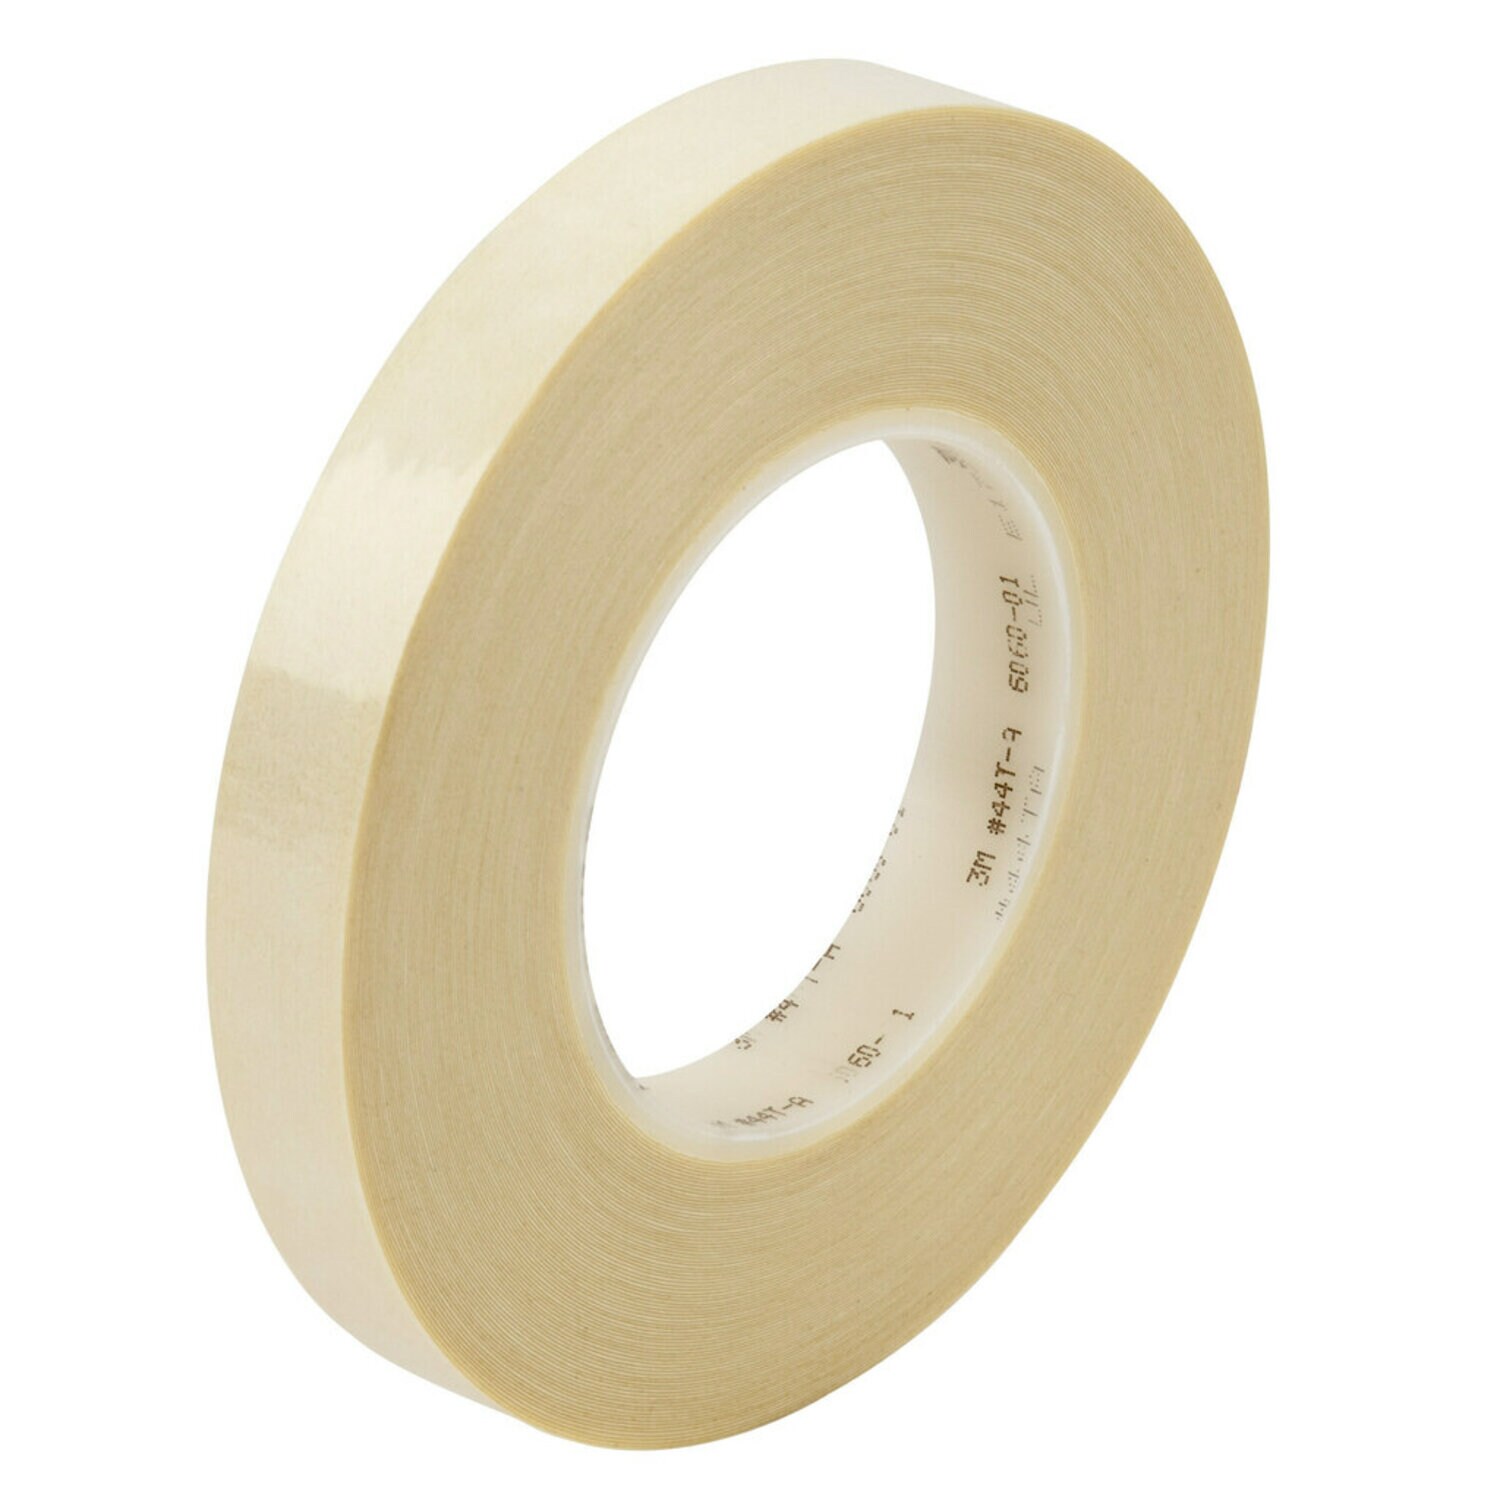 7000132934 - 3M Composite Film Electrical Tape 44T-A, 23 in x 32.8 yd, plastic core,
Log roll, 1 Roll/Case